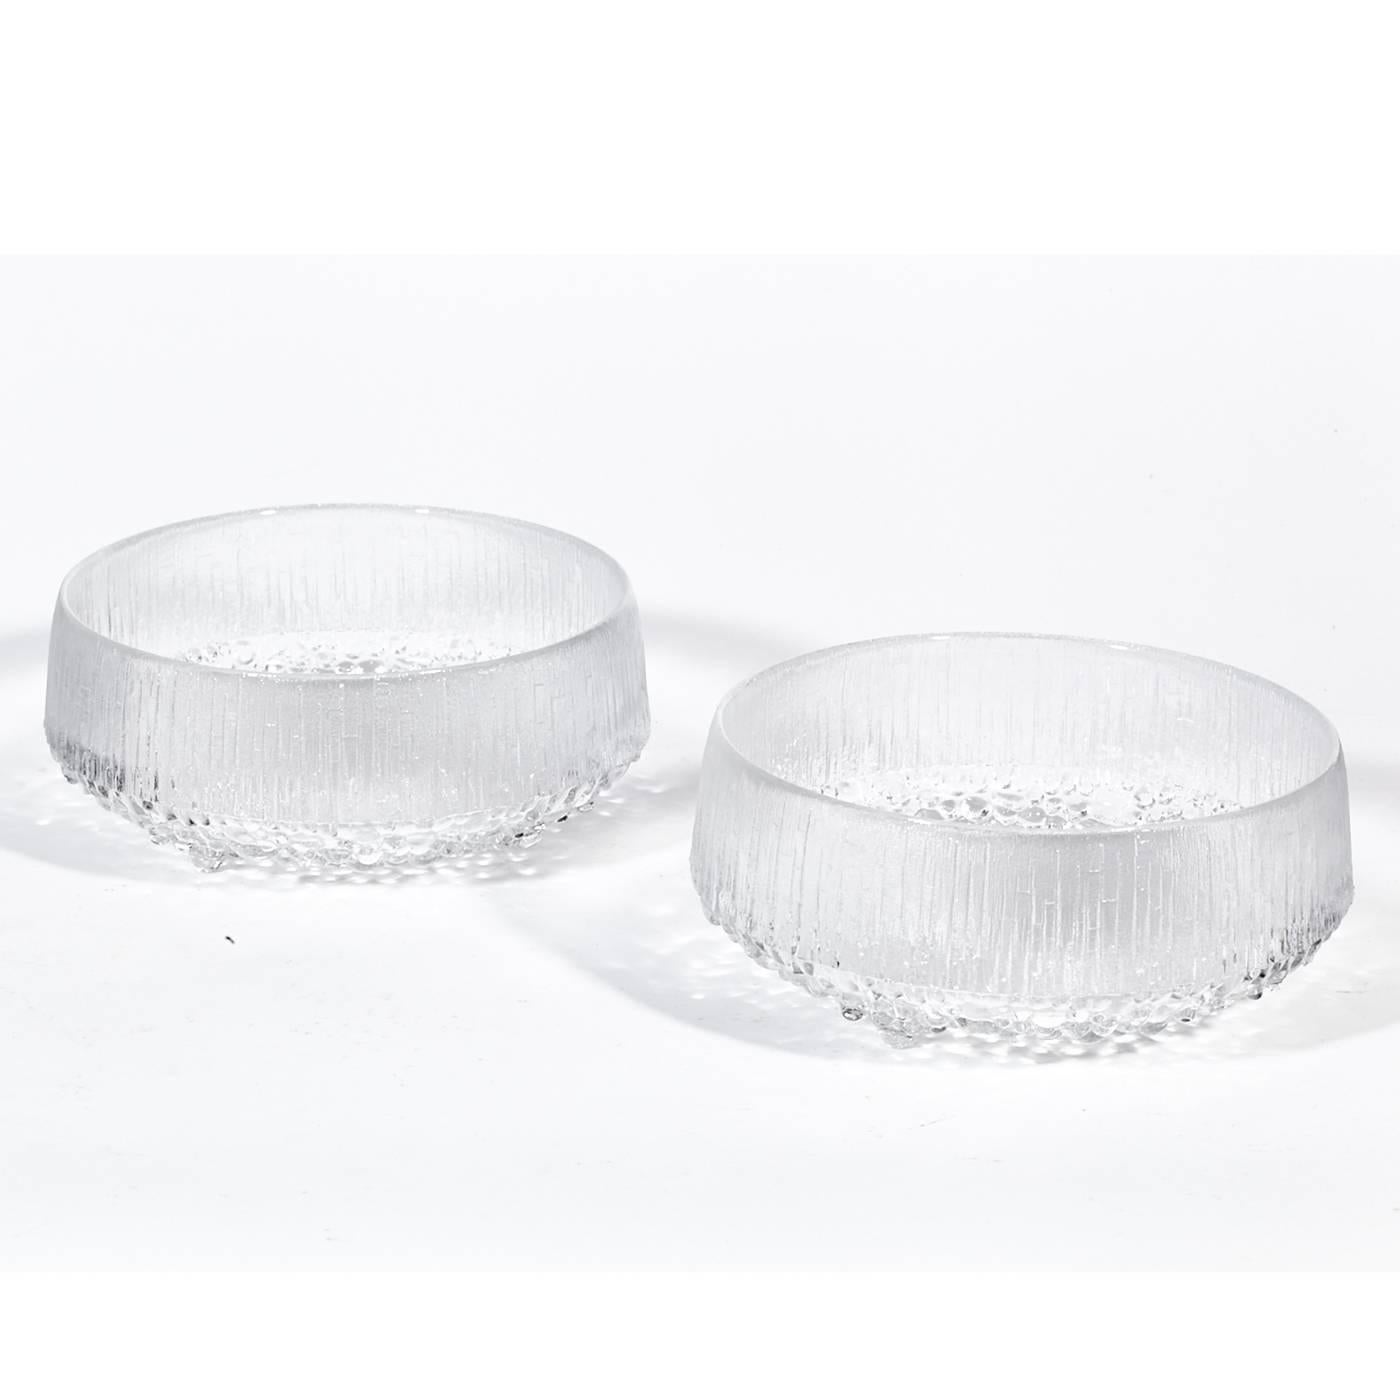 Pair of vintage 1960s clear glass serving bowls in the Ultima Thule pattern for Iittala Glass Co, Finland.